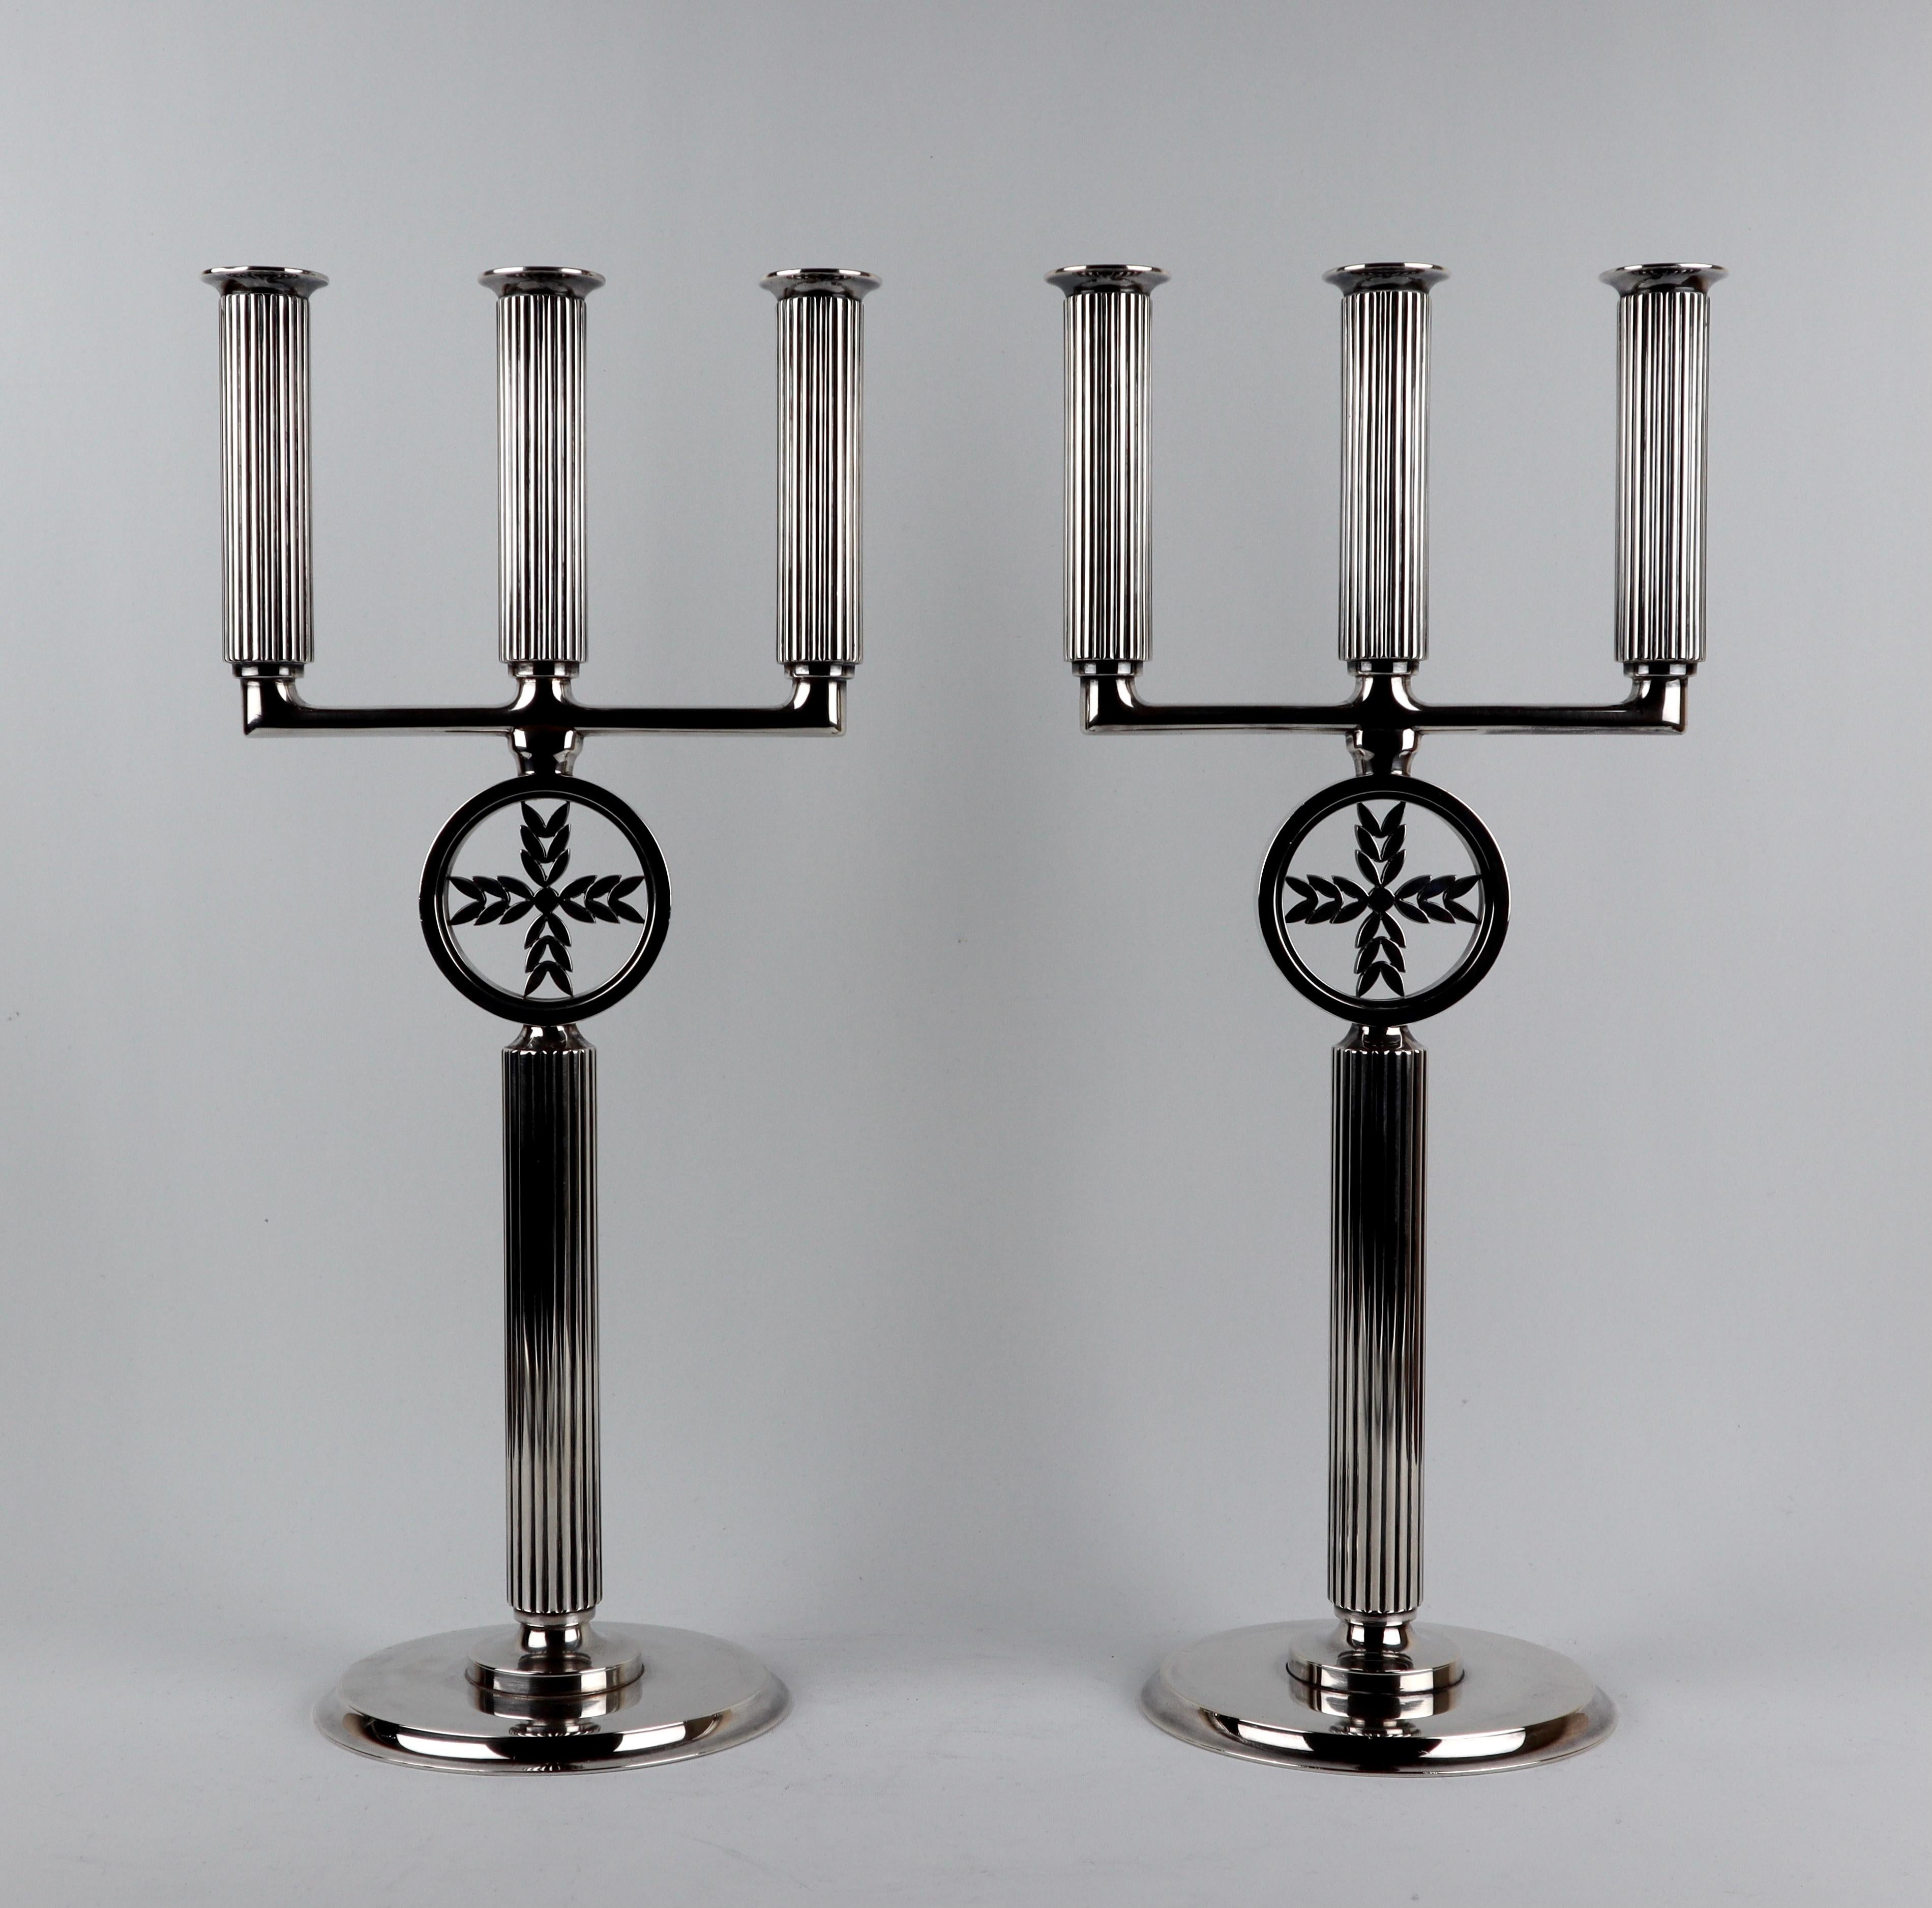 This magnificent pair of sterling silver Georg Jensen candelabras with hand chased stems, design 855C, were designed by Sigvard Bernadotte.

Hallmarked for Denmark 1945
Makers Mark Georg Jensen 
Designer Sigvard Bernadotte 

Measures: height